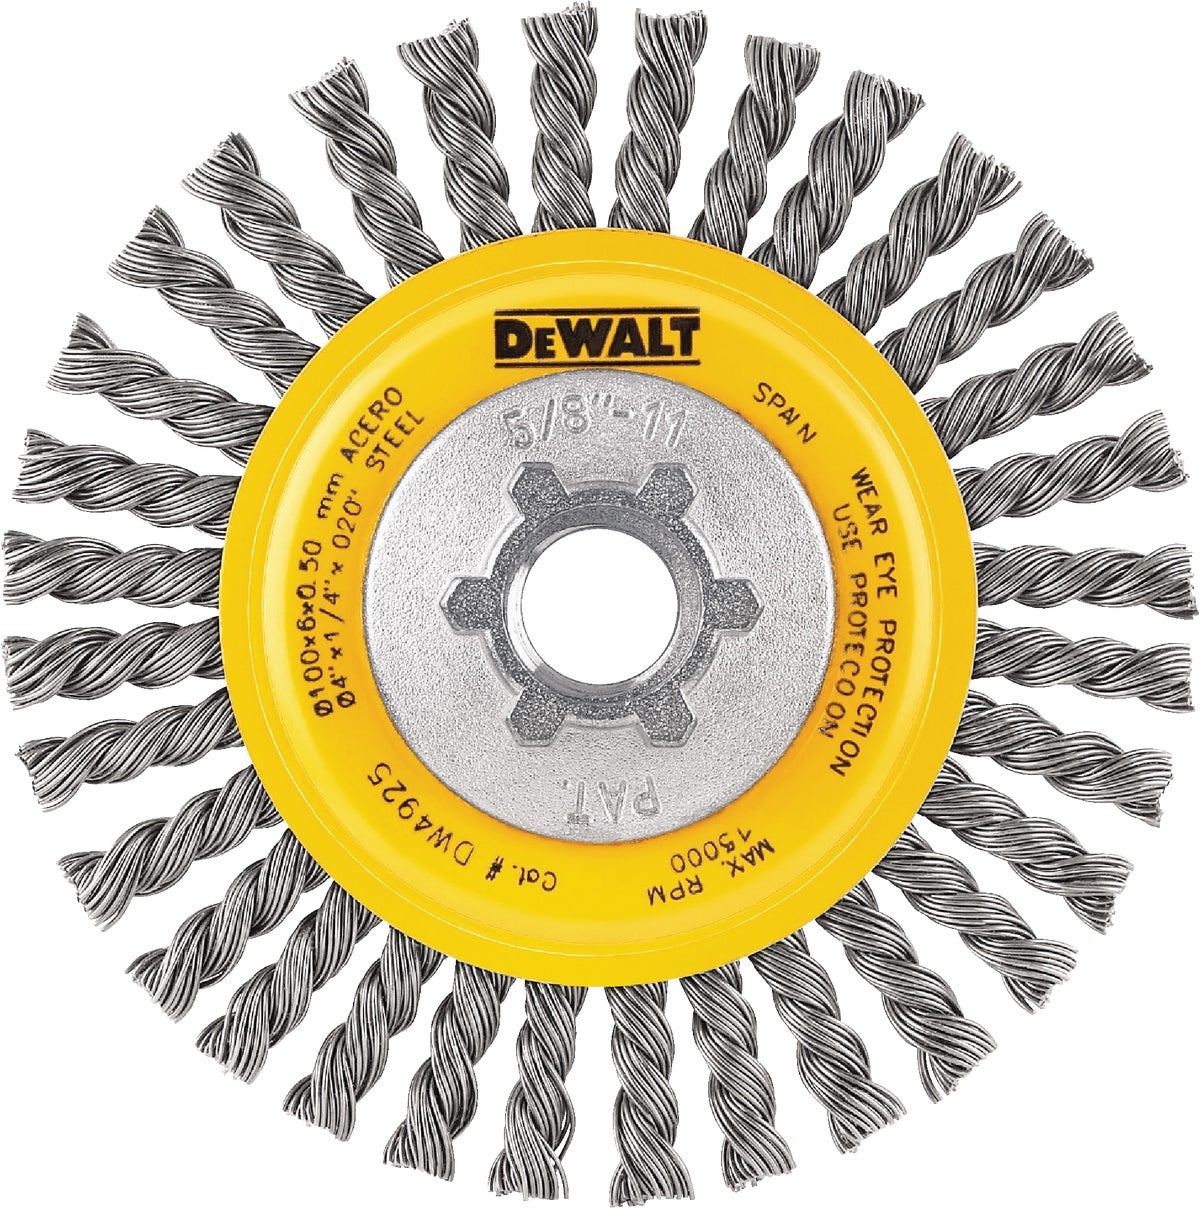 DEWALT 3 In. Crimped 0.014 In. Angle Grinder Wire Brush - Farmers